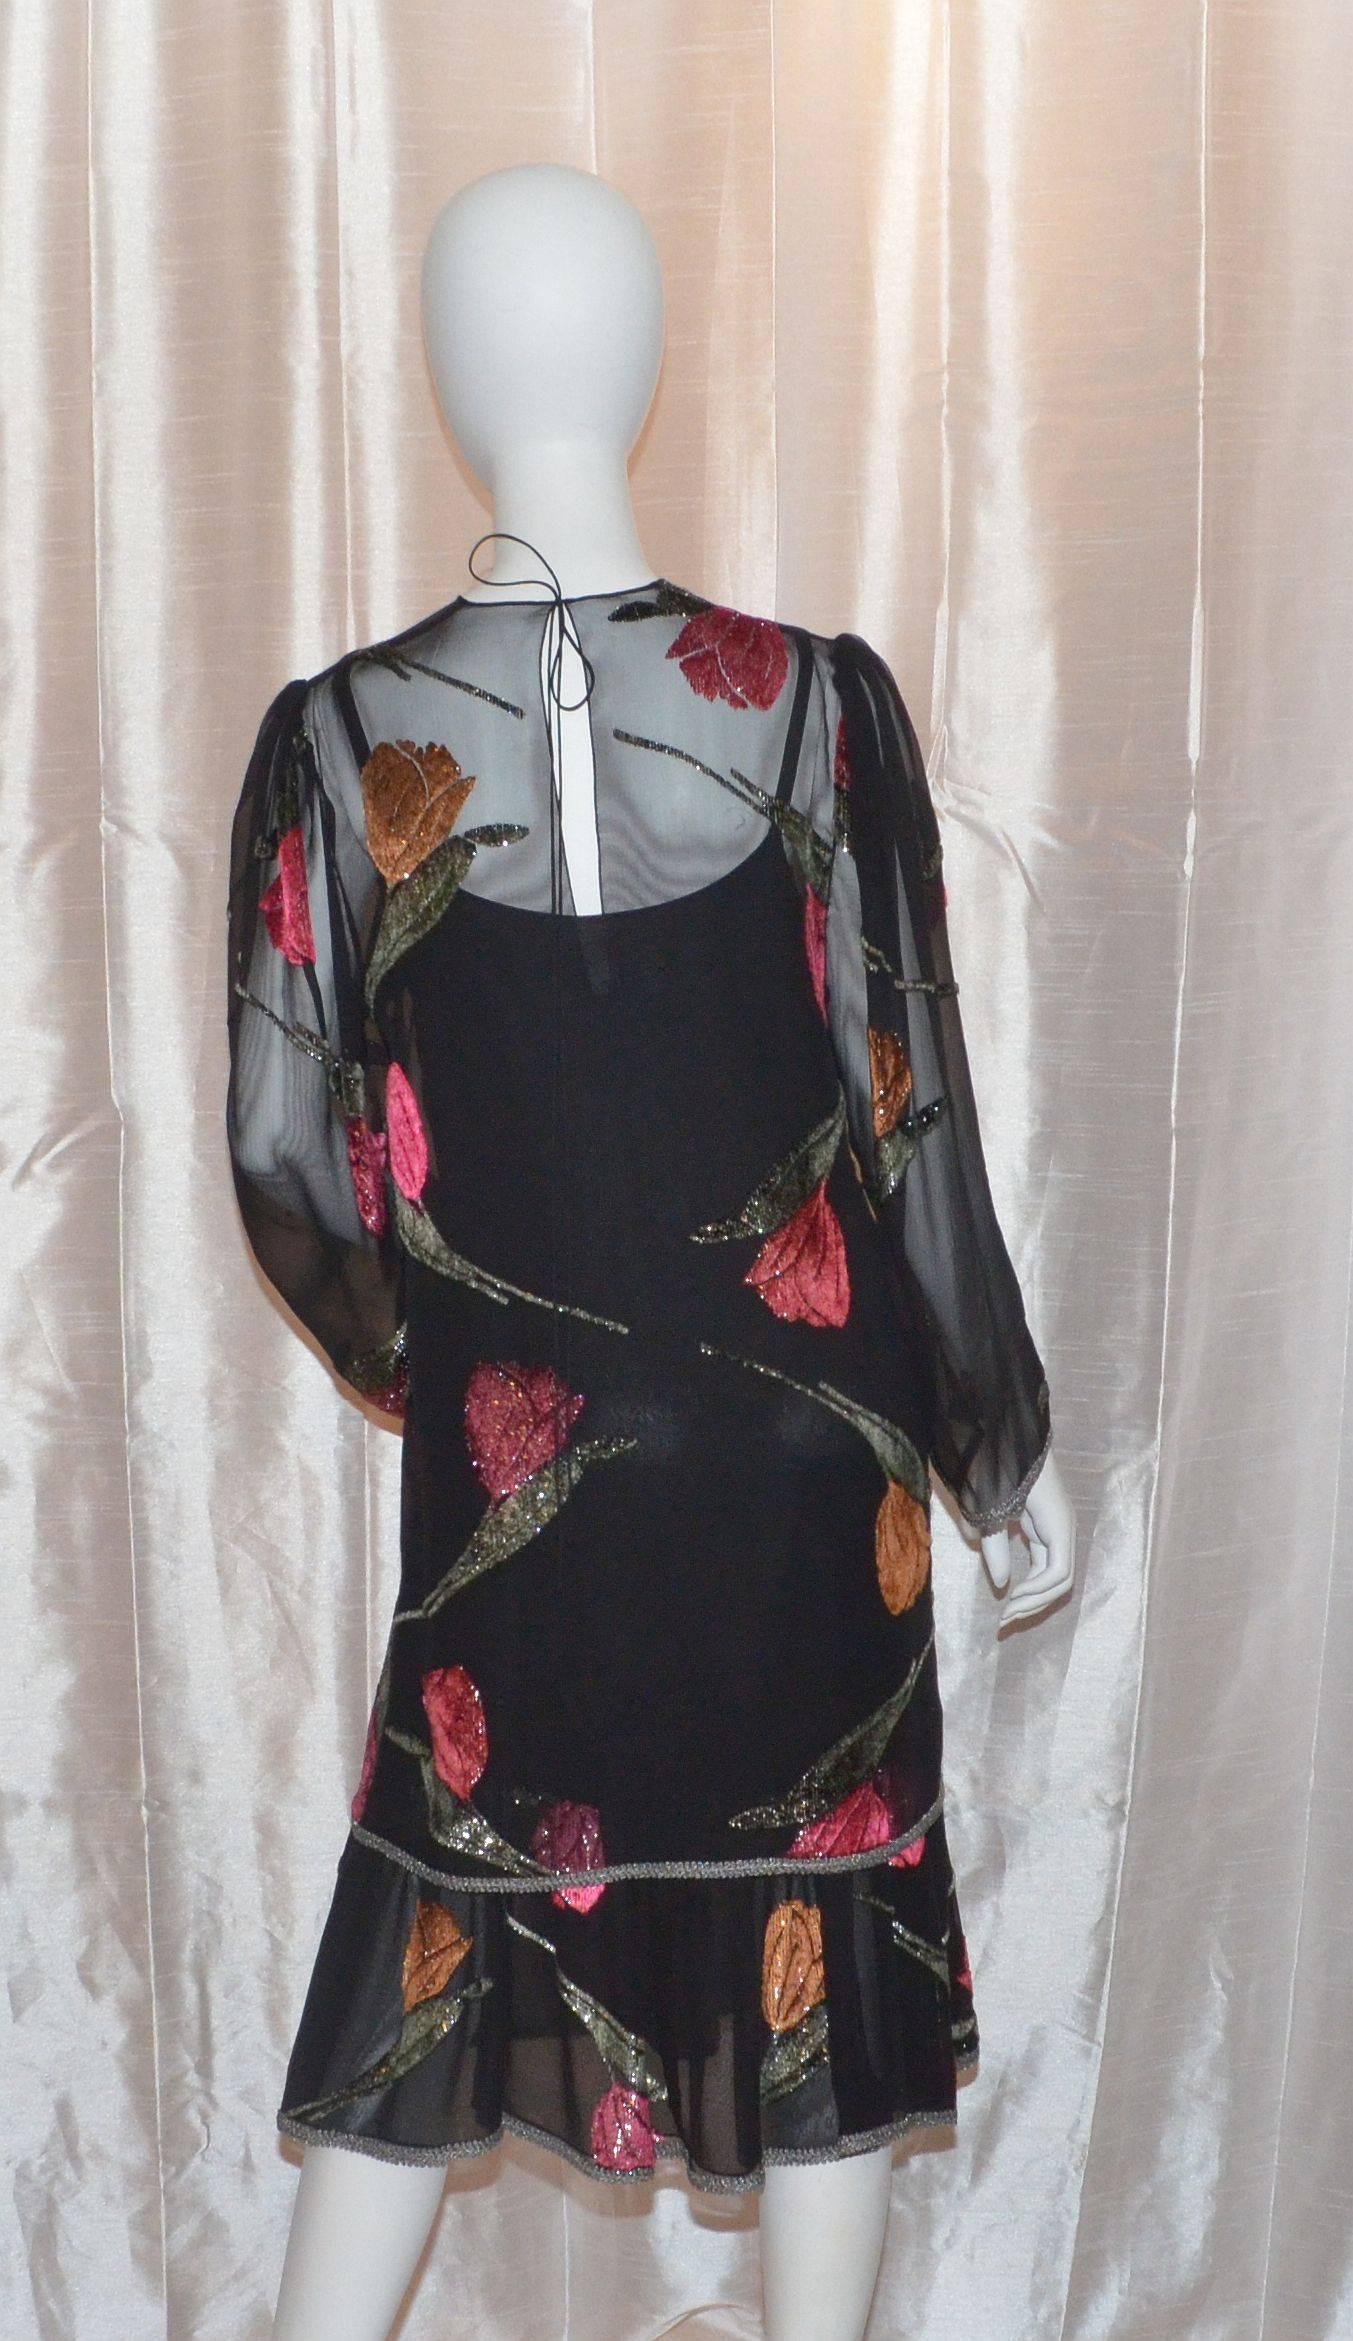 Pauline Trigere 2 piece dress is made with a silk chiffon and has pink cut velvet flowers throughout. Slip dress (bottom layer) has spaghetti straps that are adjustable, a side zipper closure, and drop waist in matte black jersey with a burn out